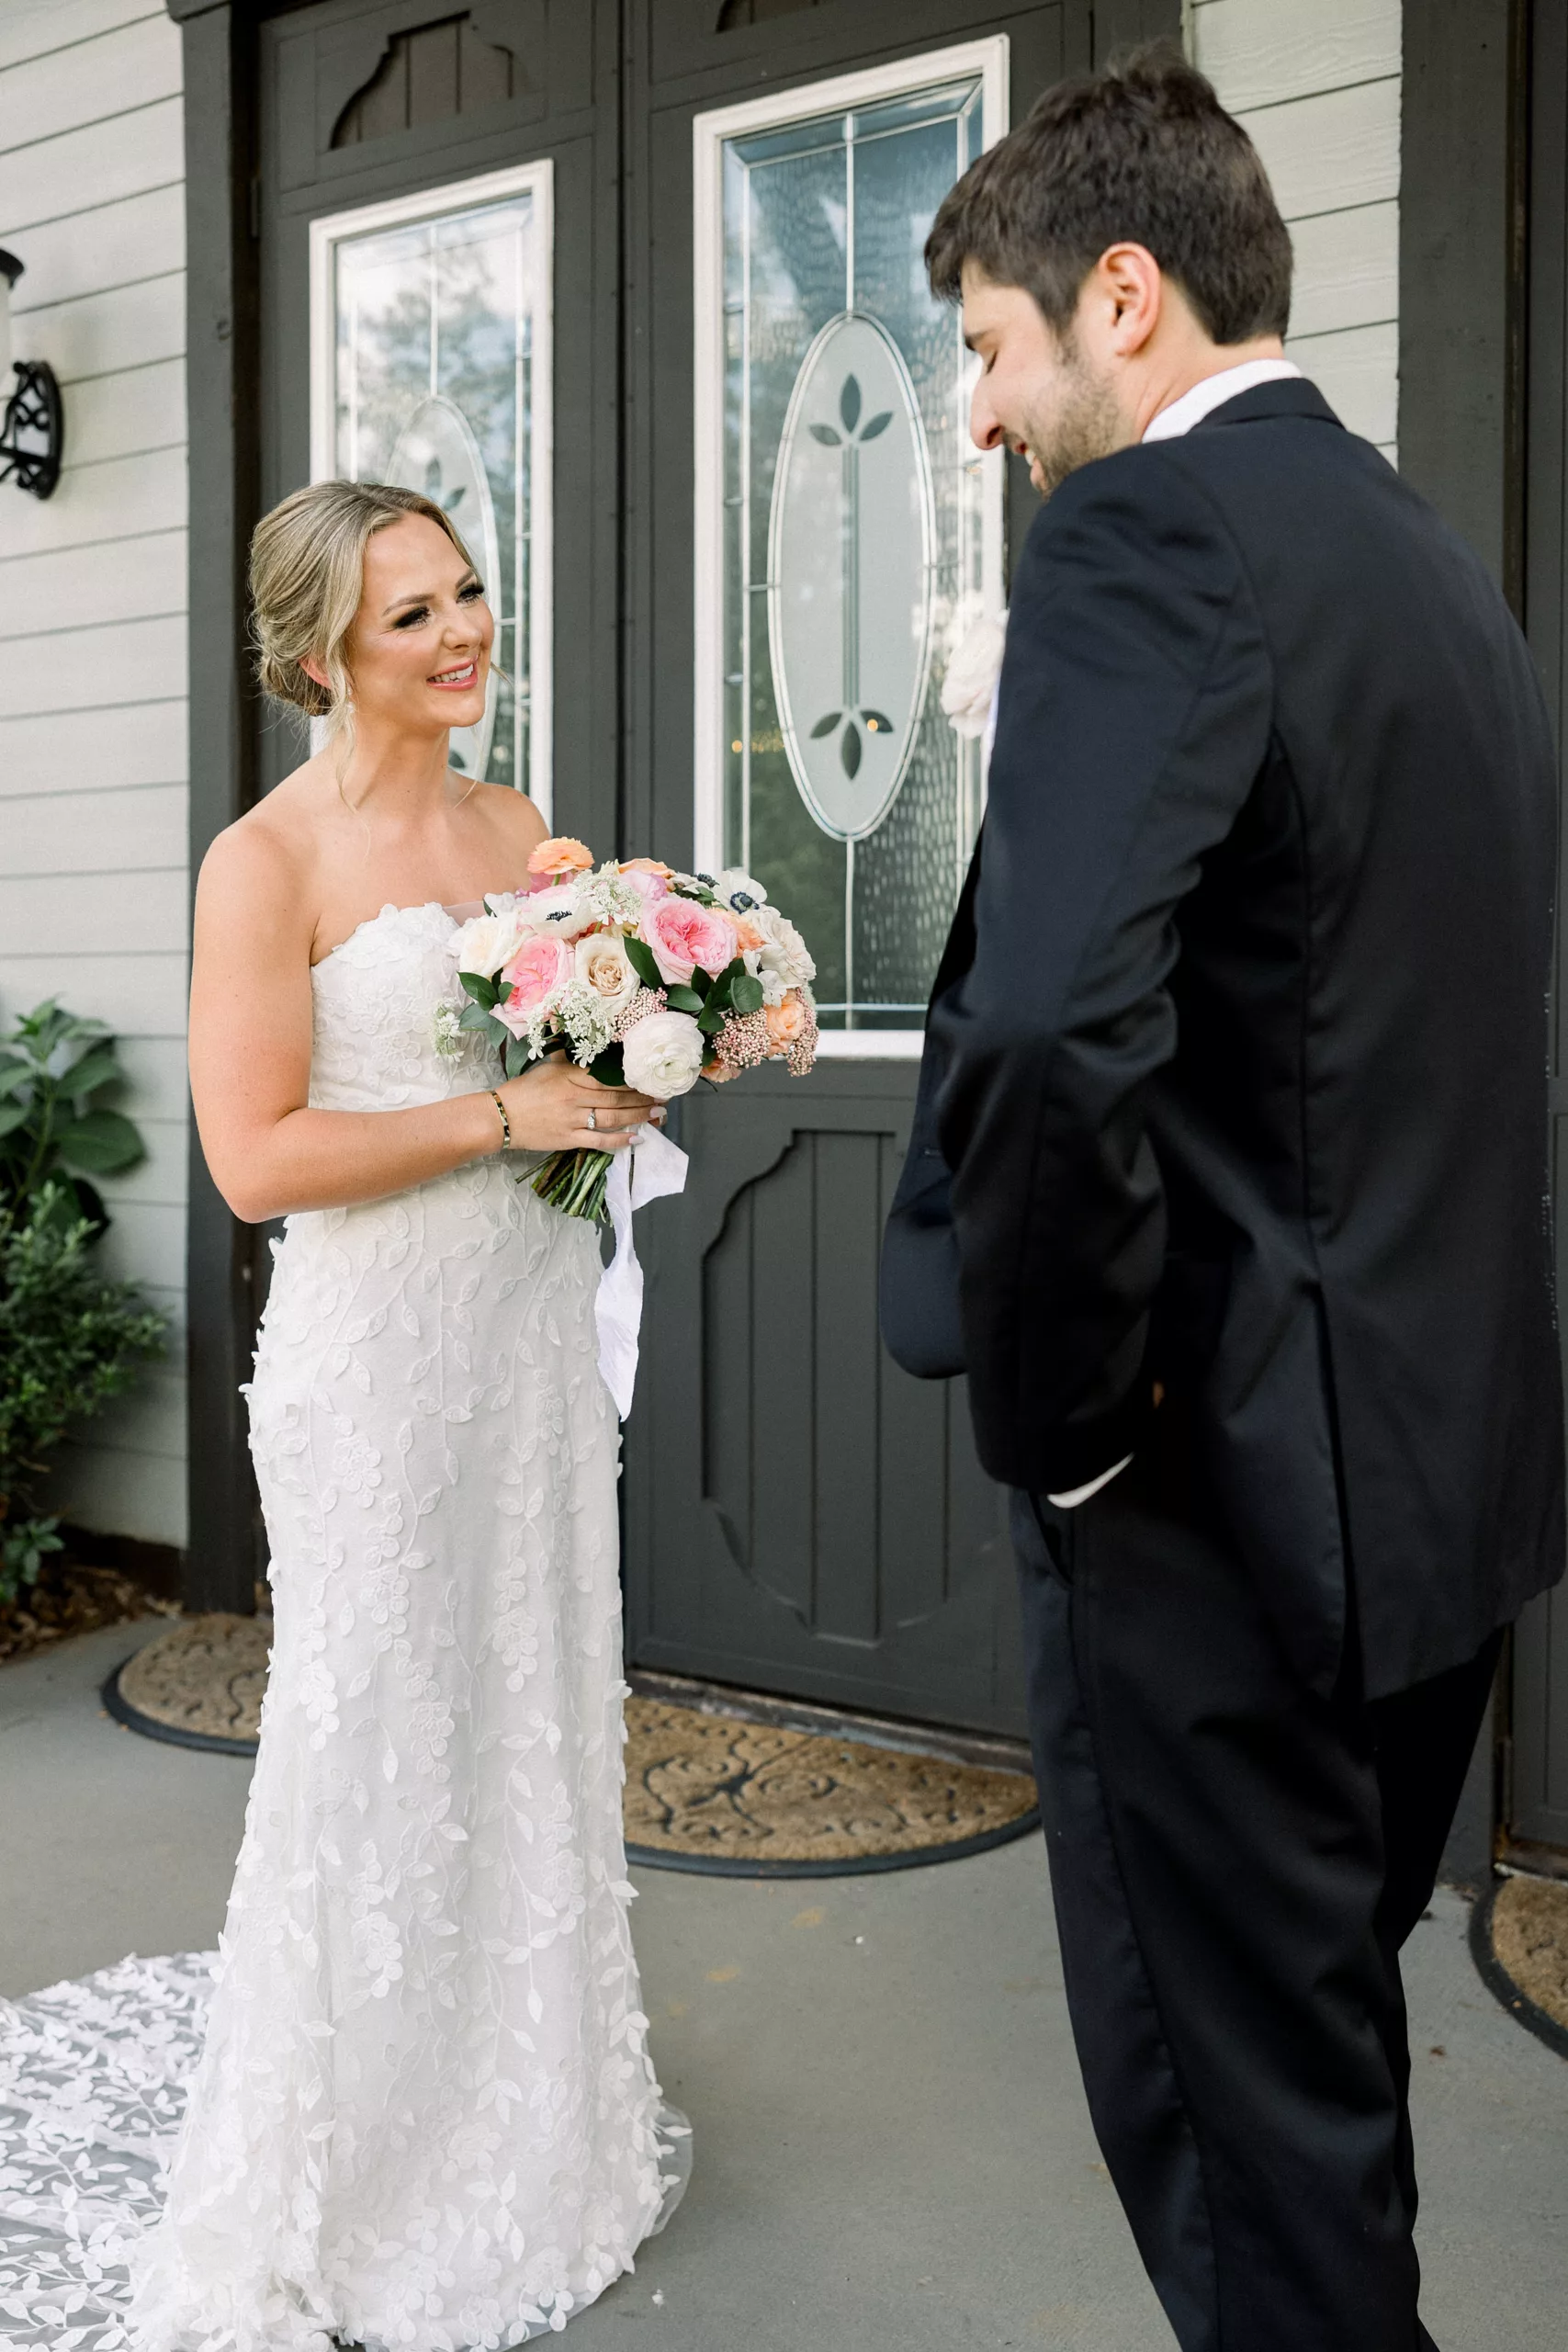 A groom stands with hands in his pockets while crying after seeing his bride for the first time on their wedding day before the ceremony on a porch